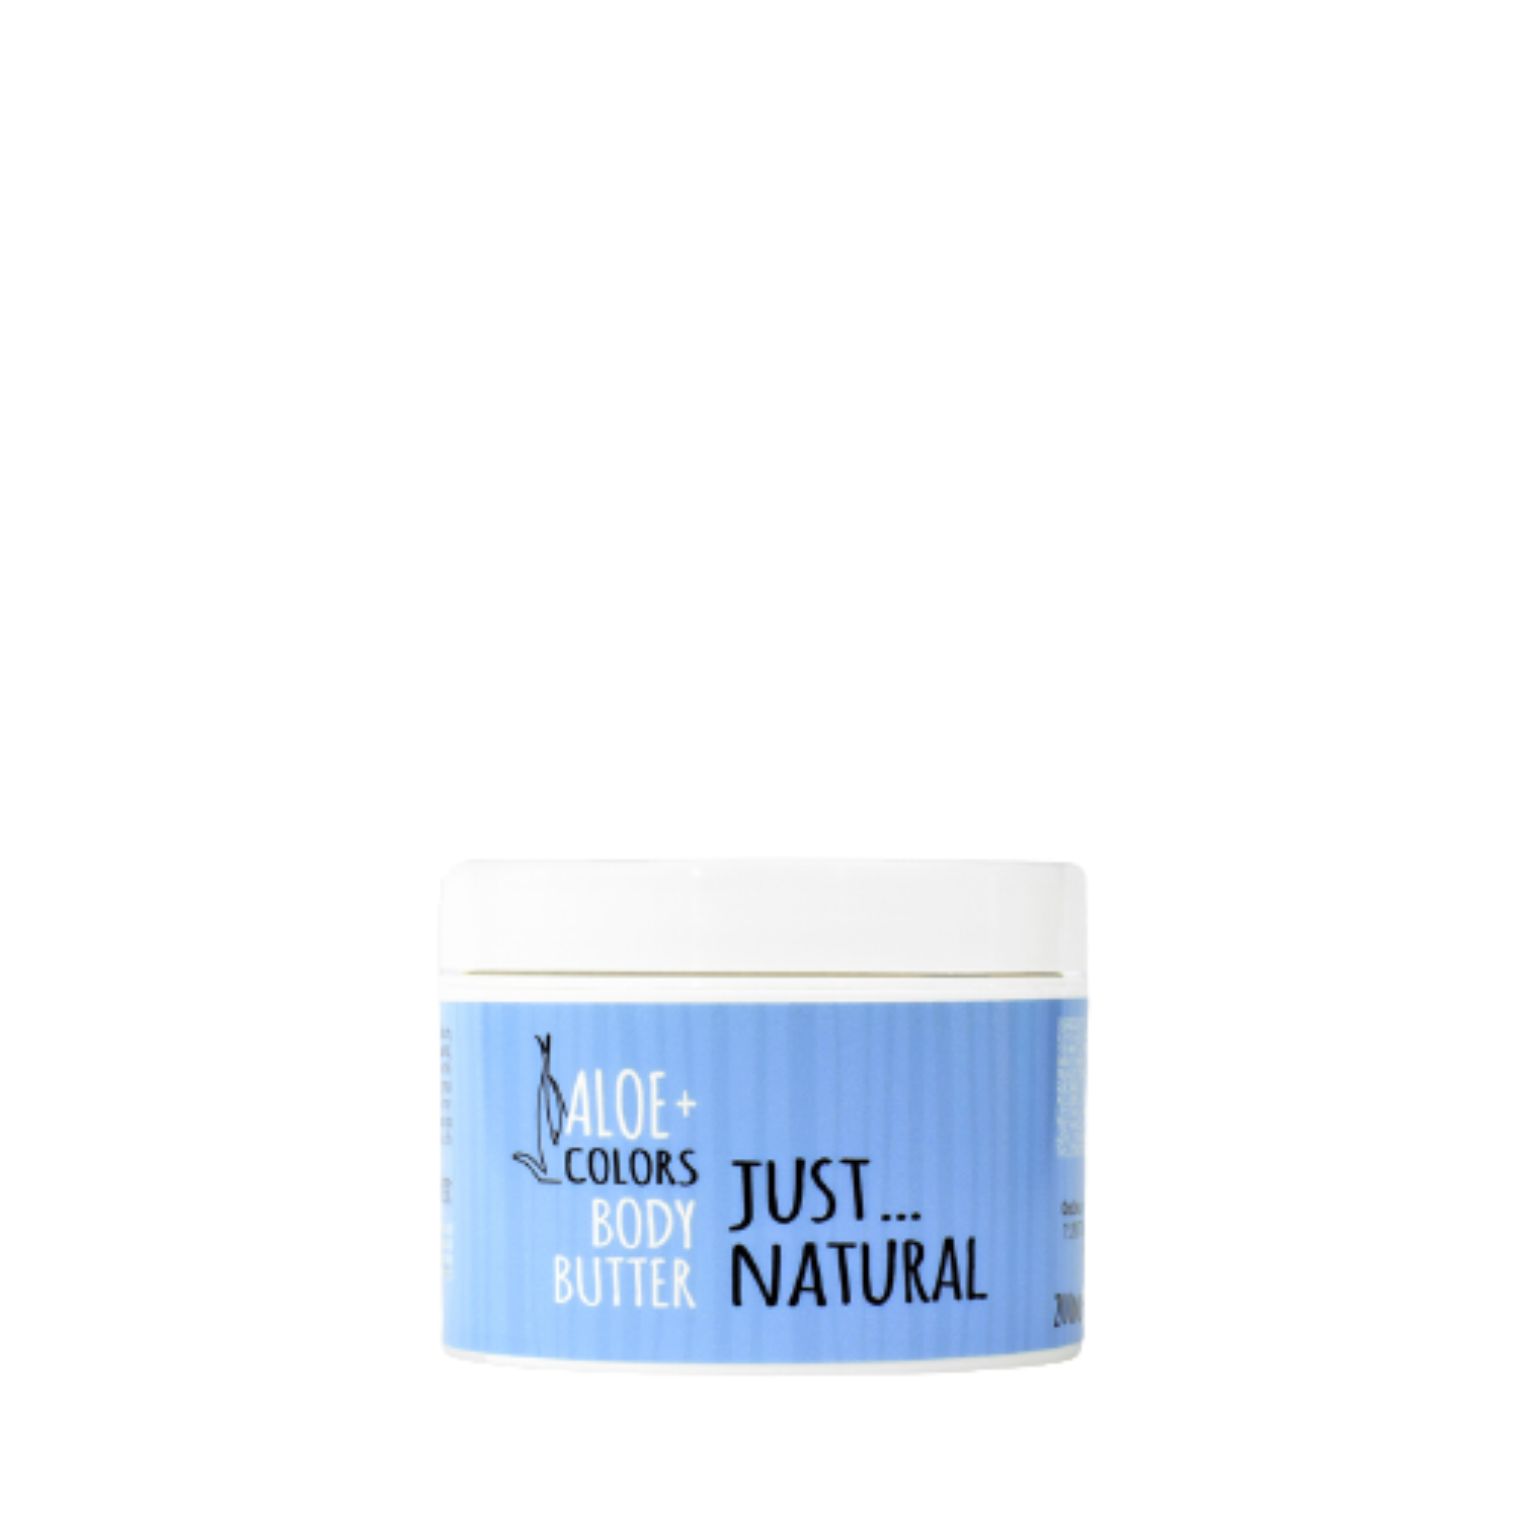 Aloe_plus_Colors_Just-Natural_body_butter_200ml